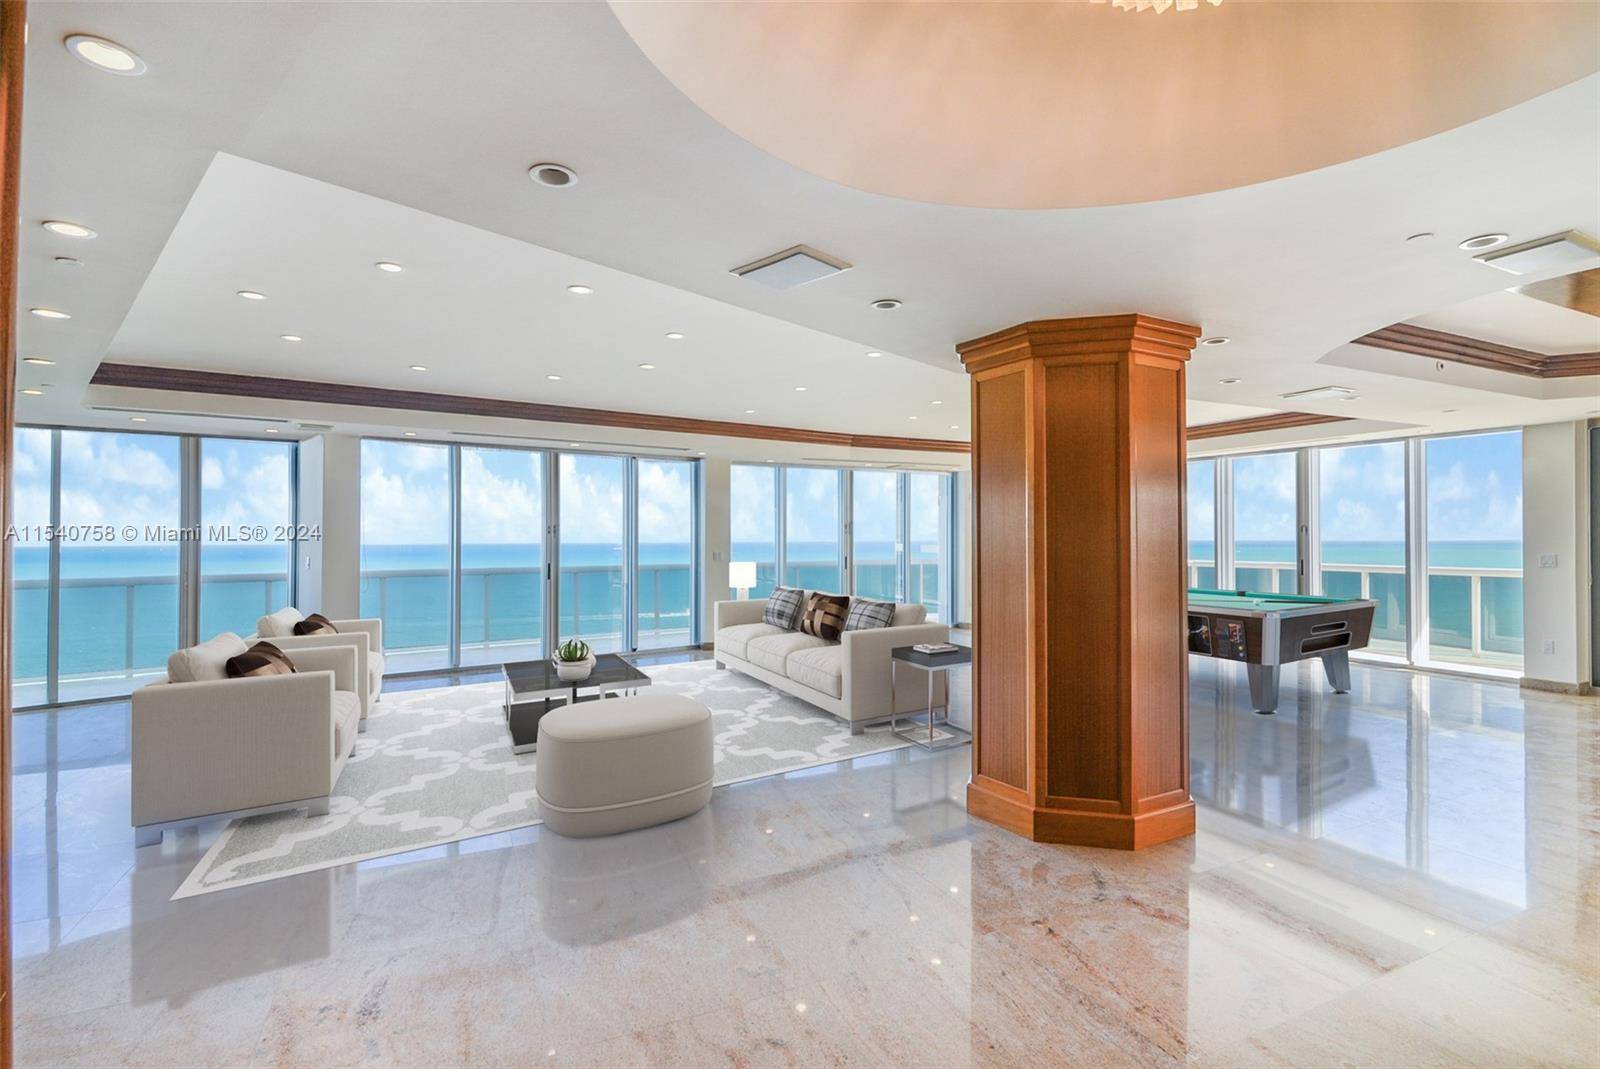 The biggest Penthouse unit in Bal Harbour.